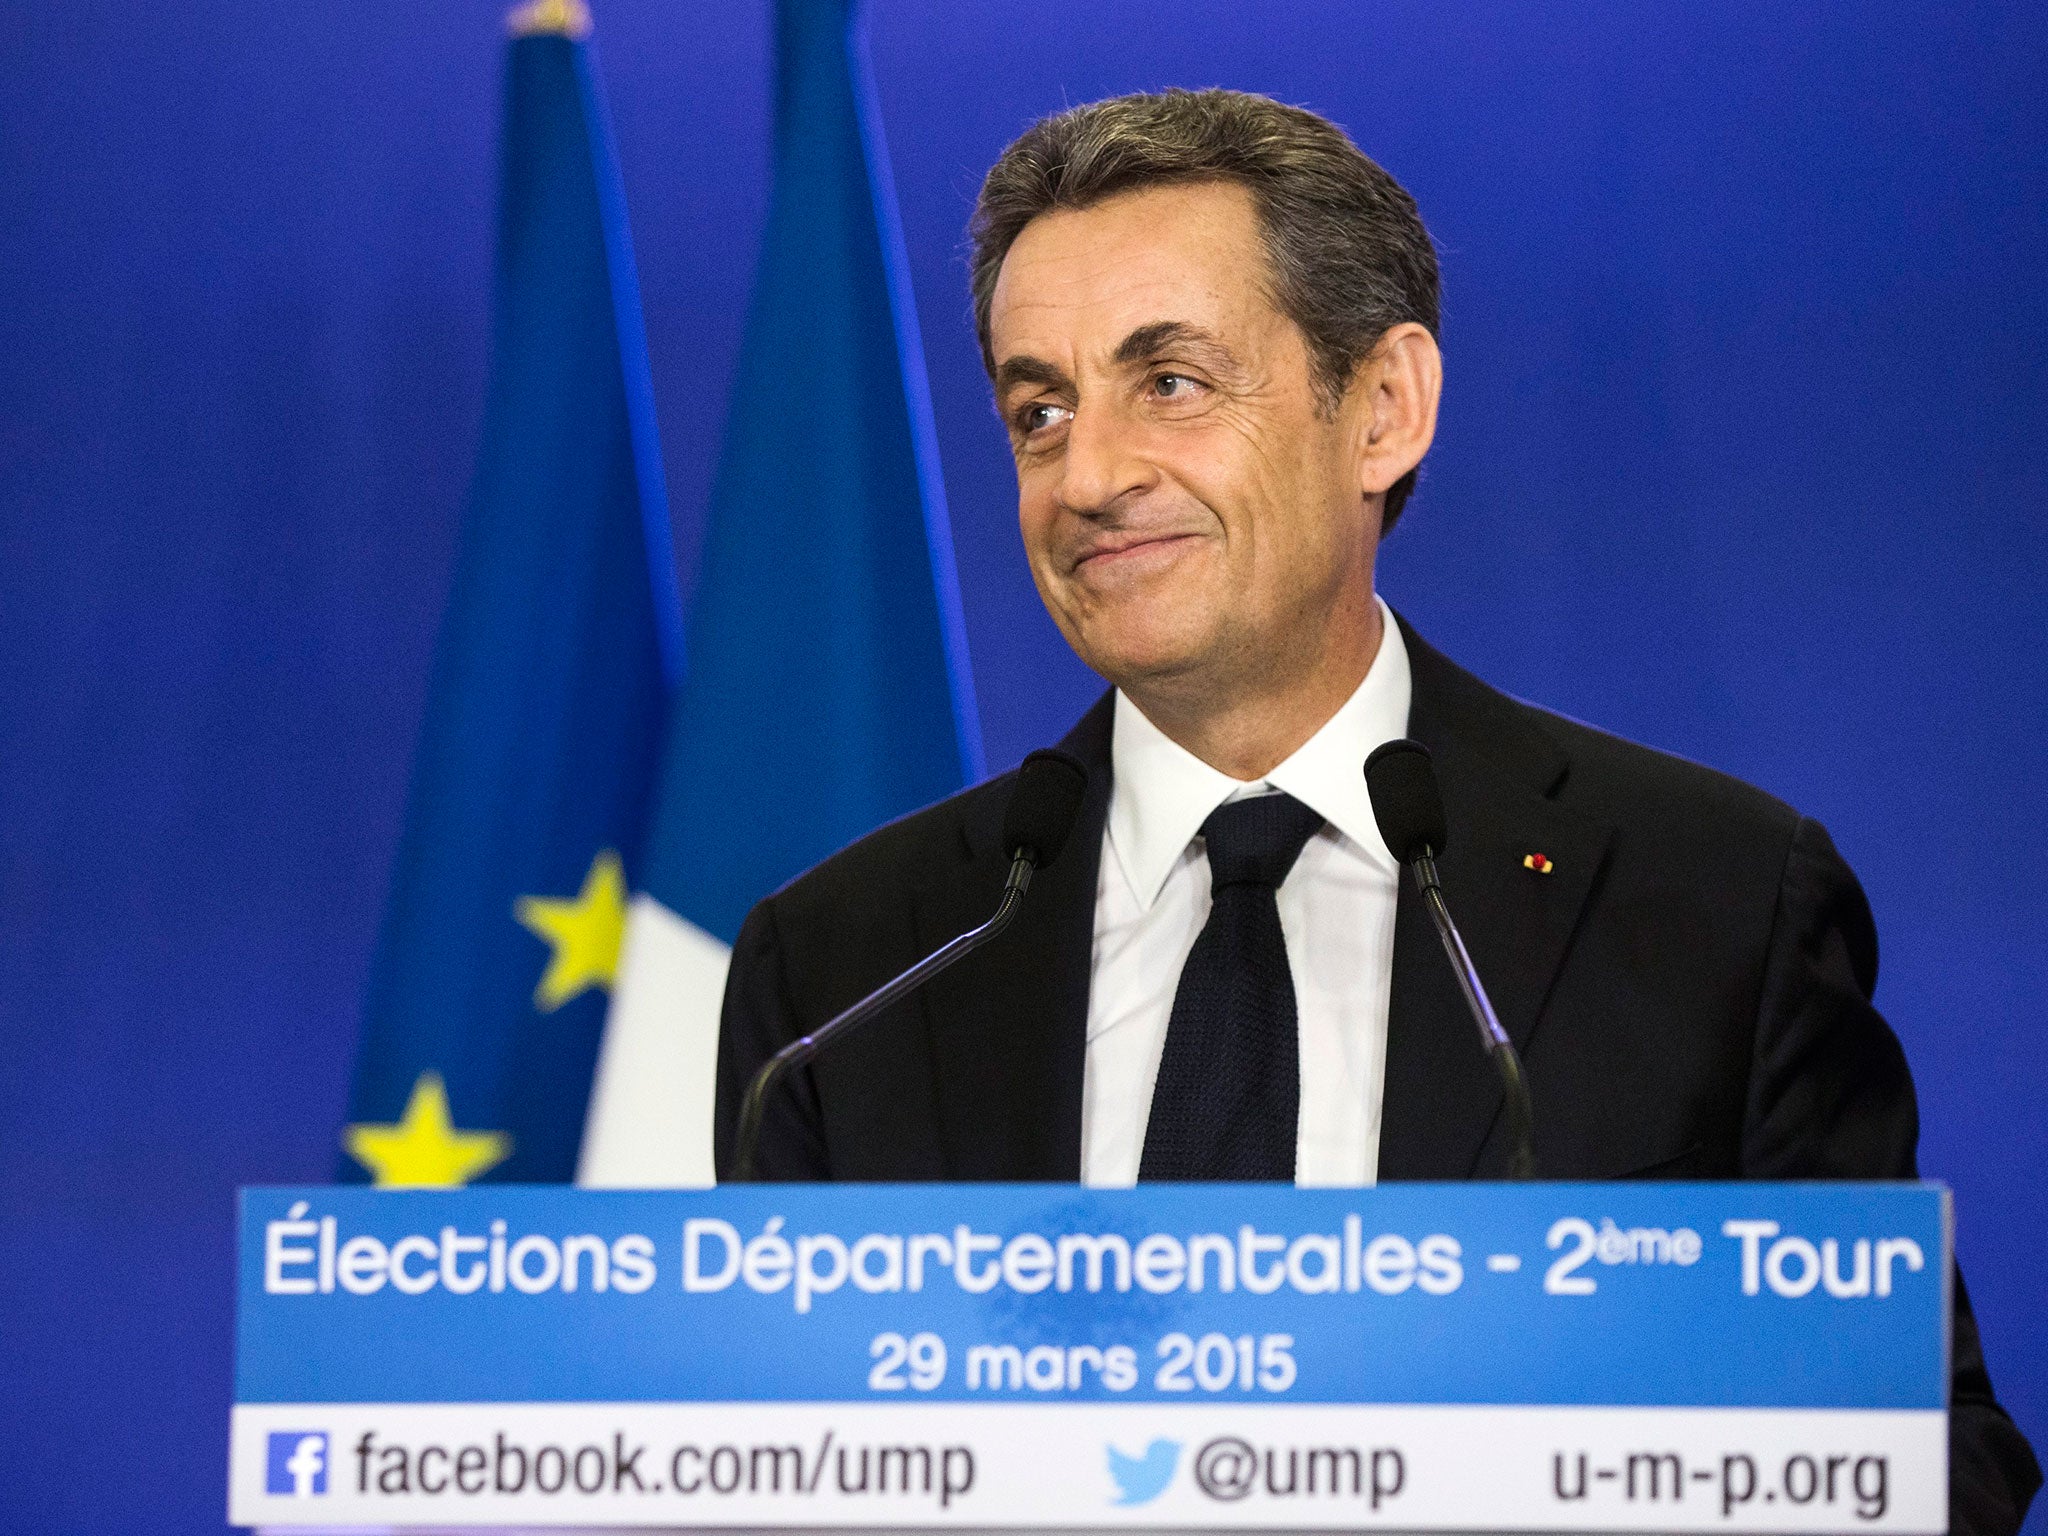 Nicolas Sarkozy’s centre-right party scored a crushing victory in French local elections tonight, strengthening the former president’s chances of a comeback in 2017